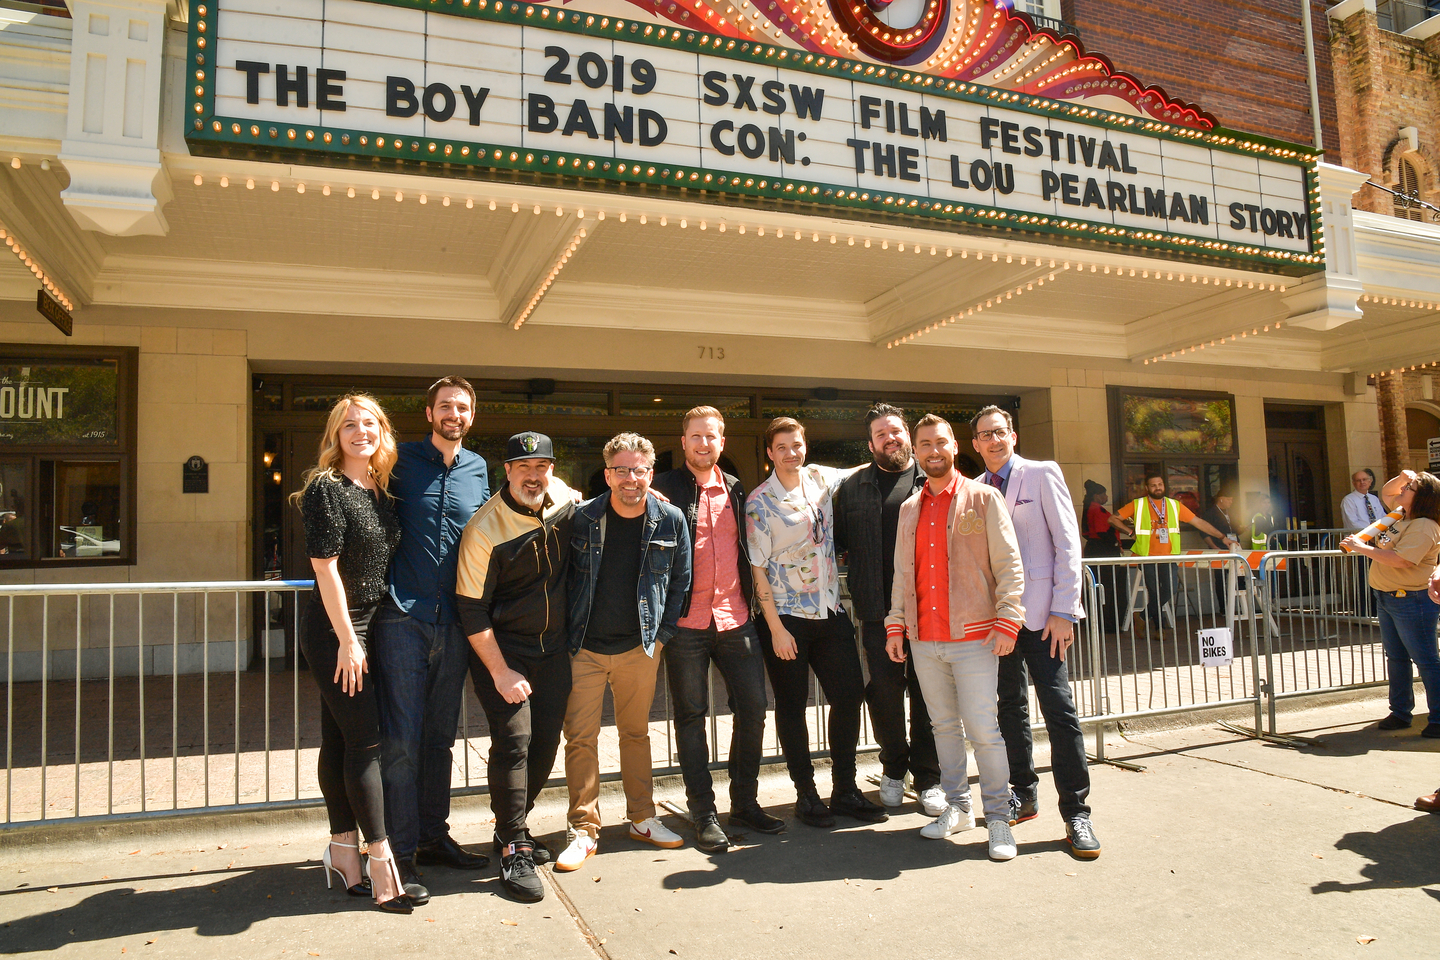 Callie Foster, Shane Patterson, Joey Fatone, Dave Holmes, Aaron Kunkel, Matthew Charles Ducey, Henry Darrow McComas, Lance Bass, and Nicholas Caprio attend the The Boy Band Con: The Lou Pearlman Story premiere at the Paramount Theatre.